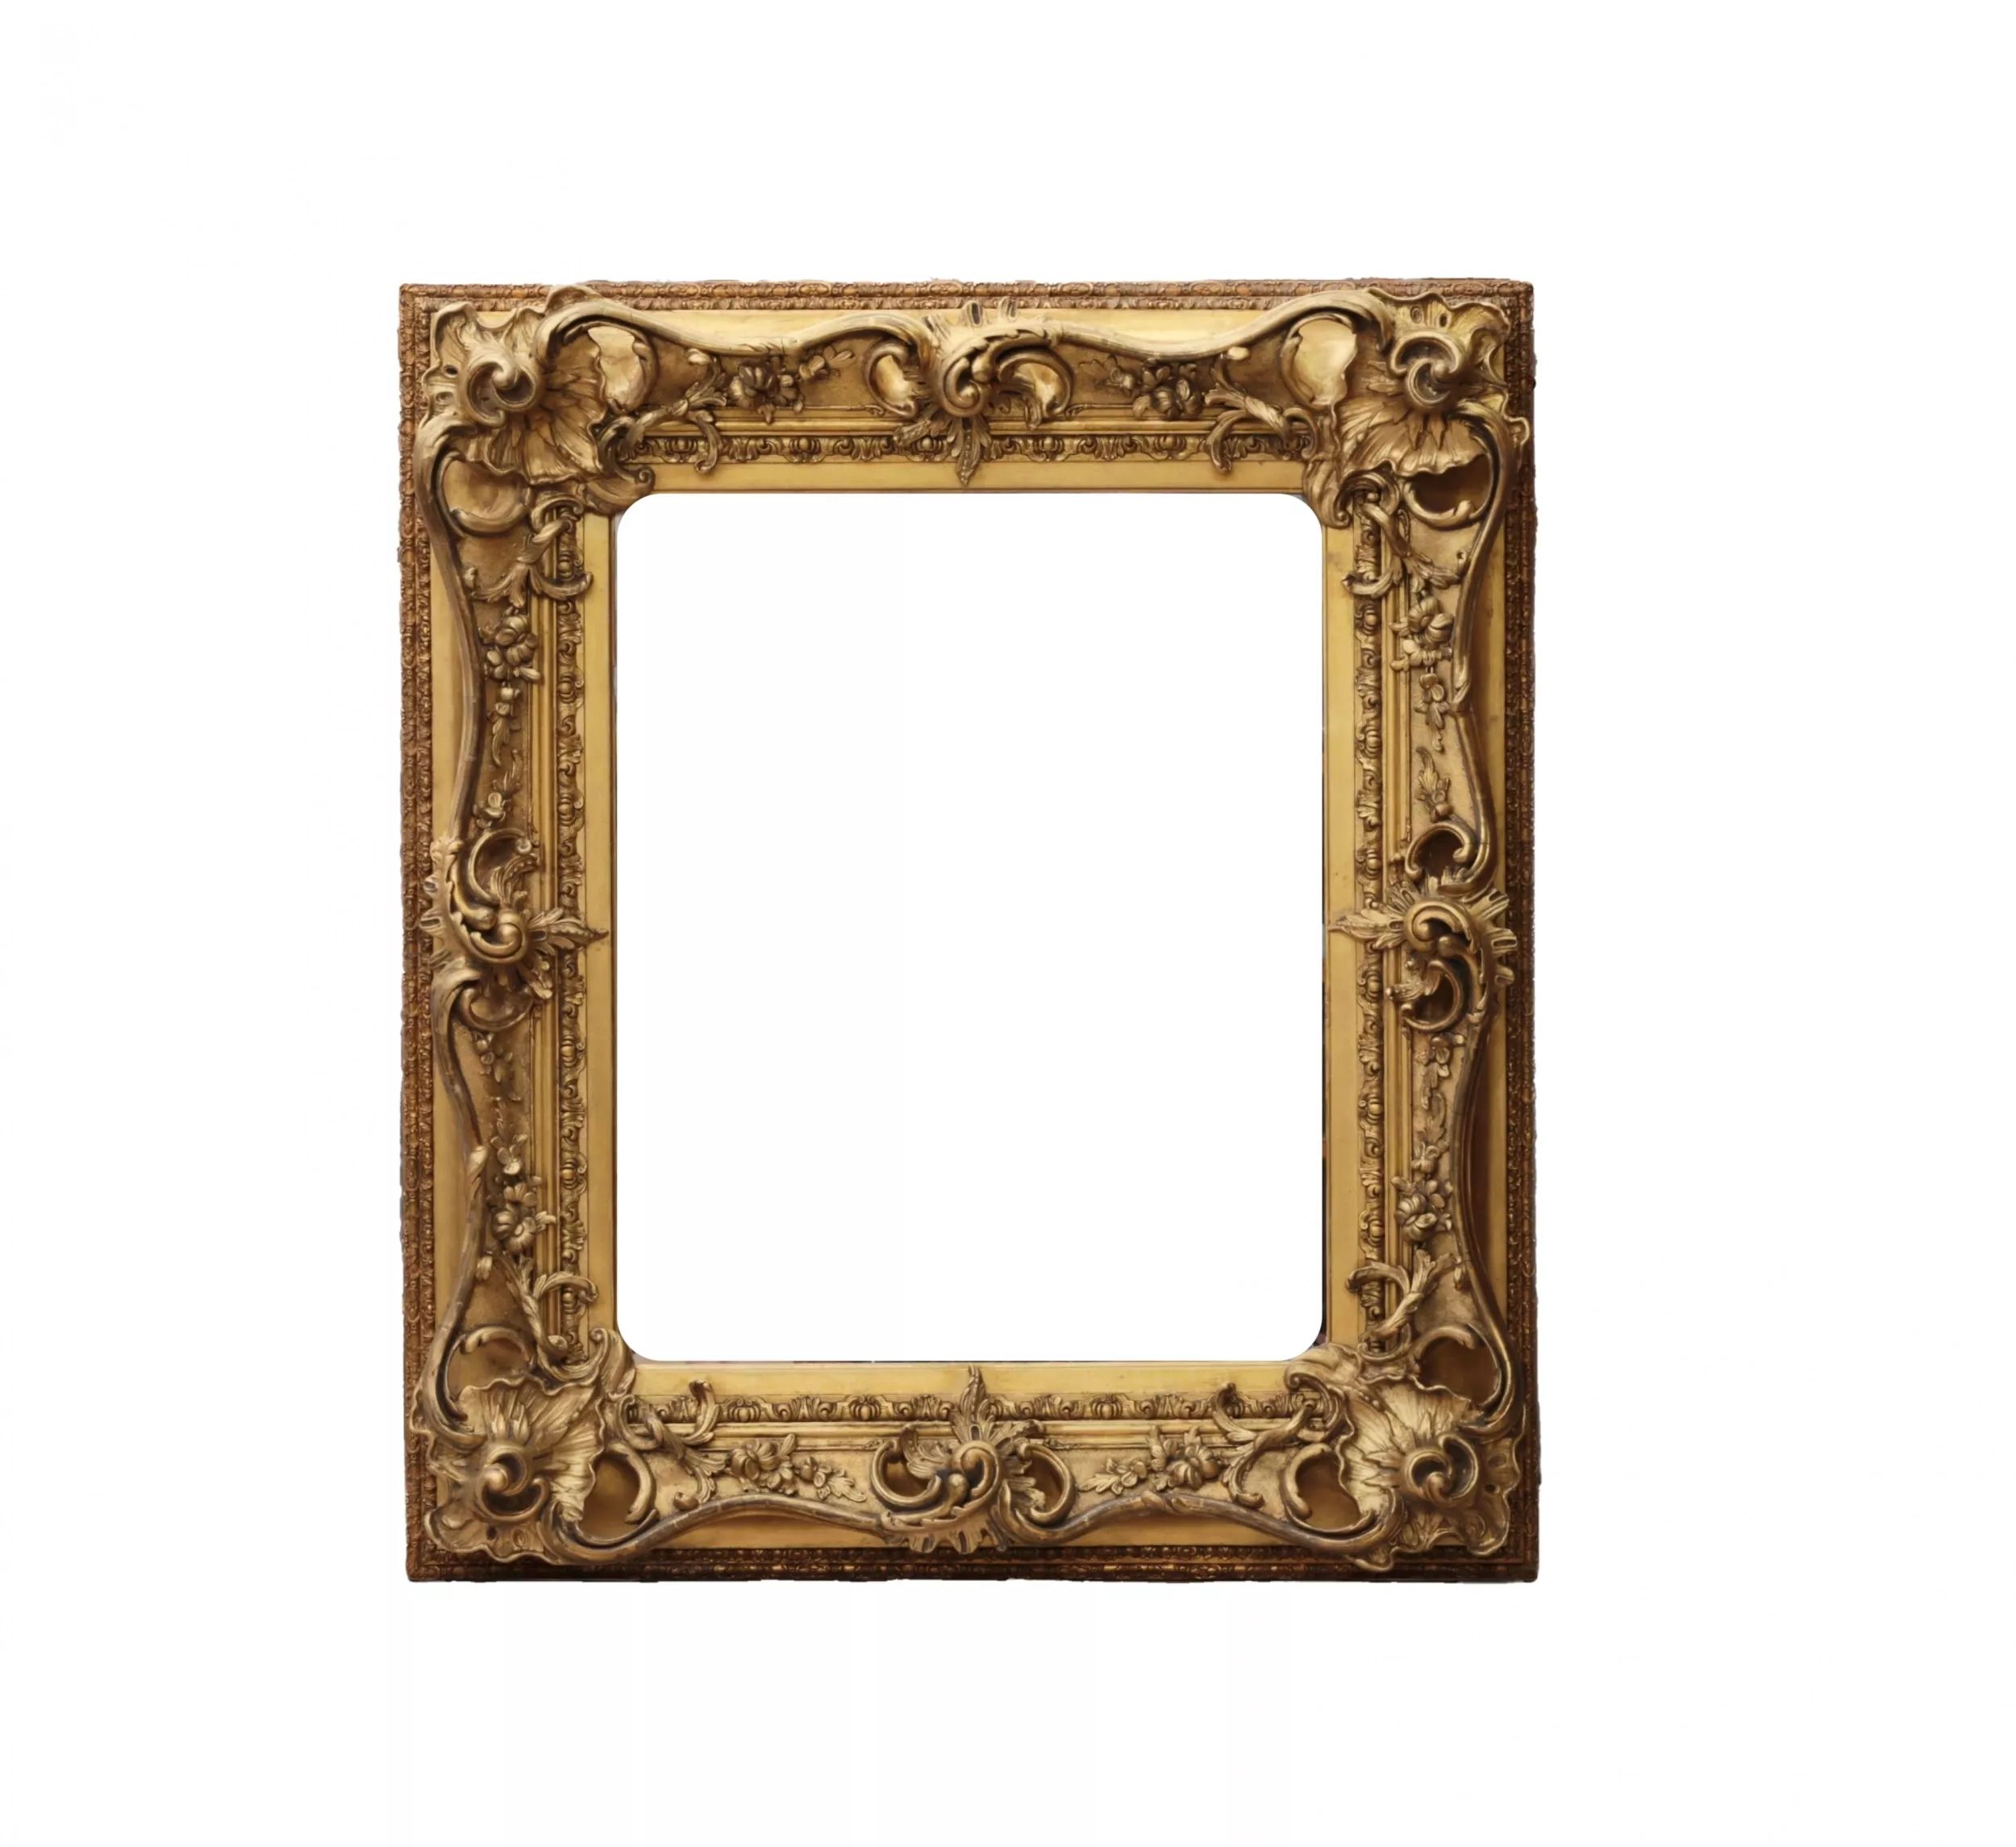 Mirror-in-frame-of-Neo-rococo-style-19th-century